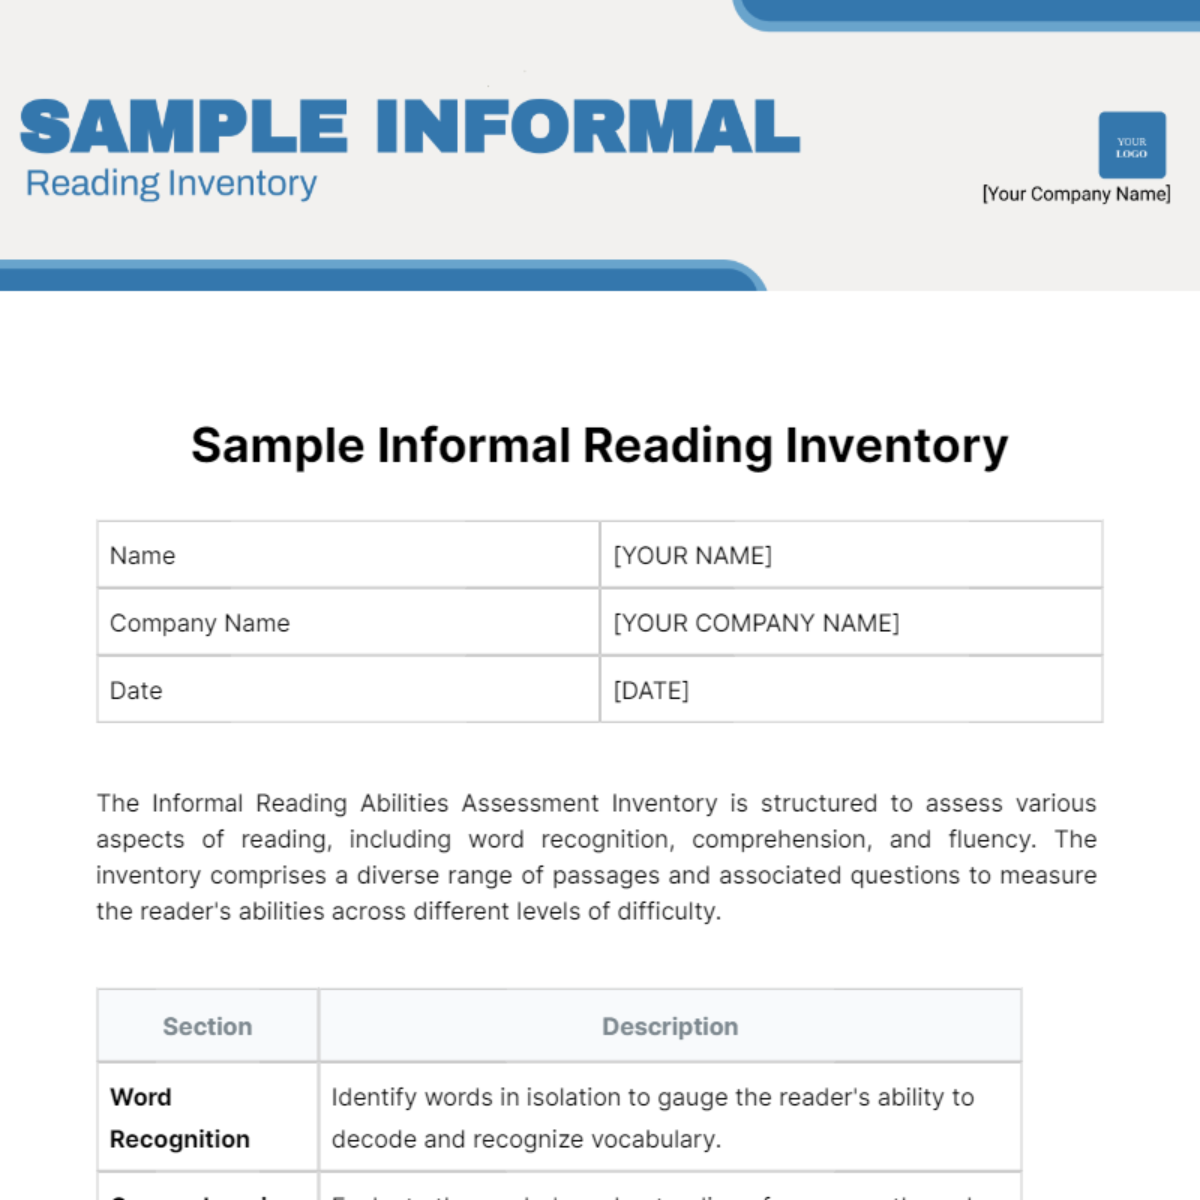 Sample Informal Reading Inventory Template